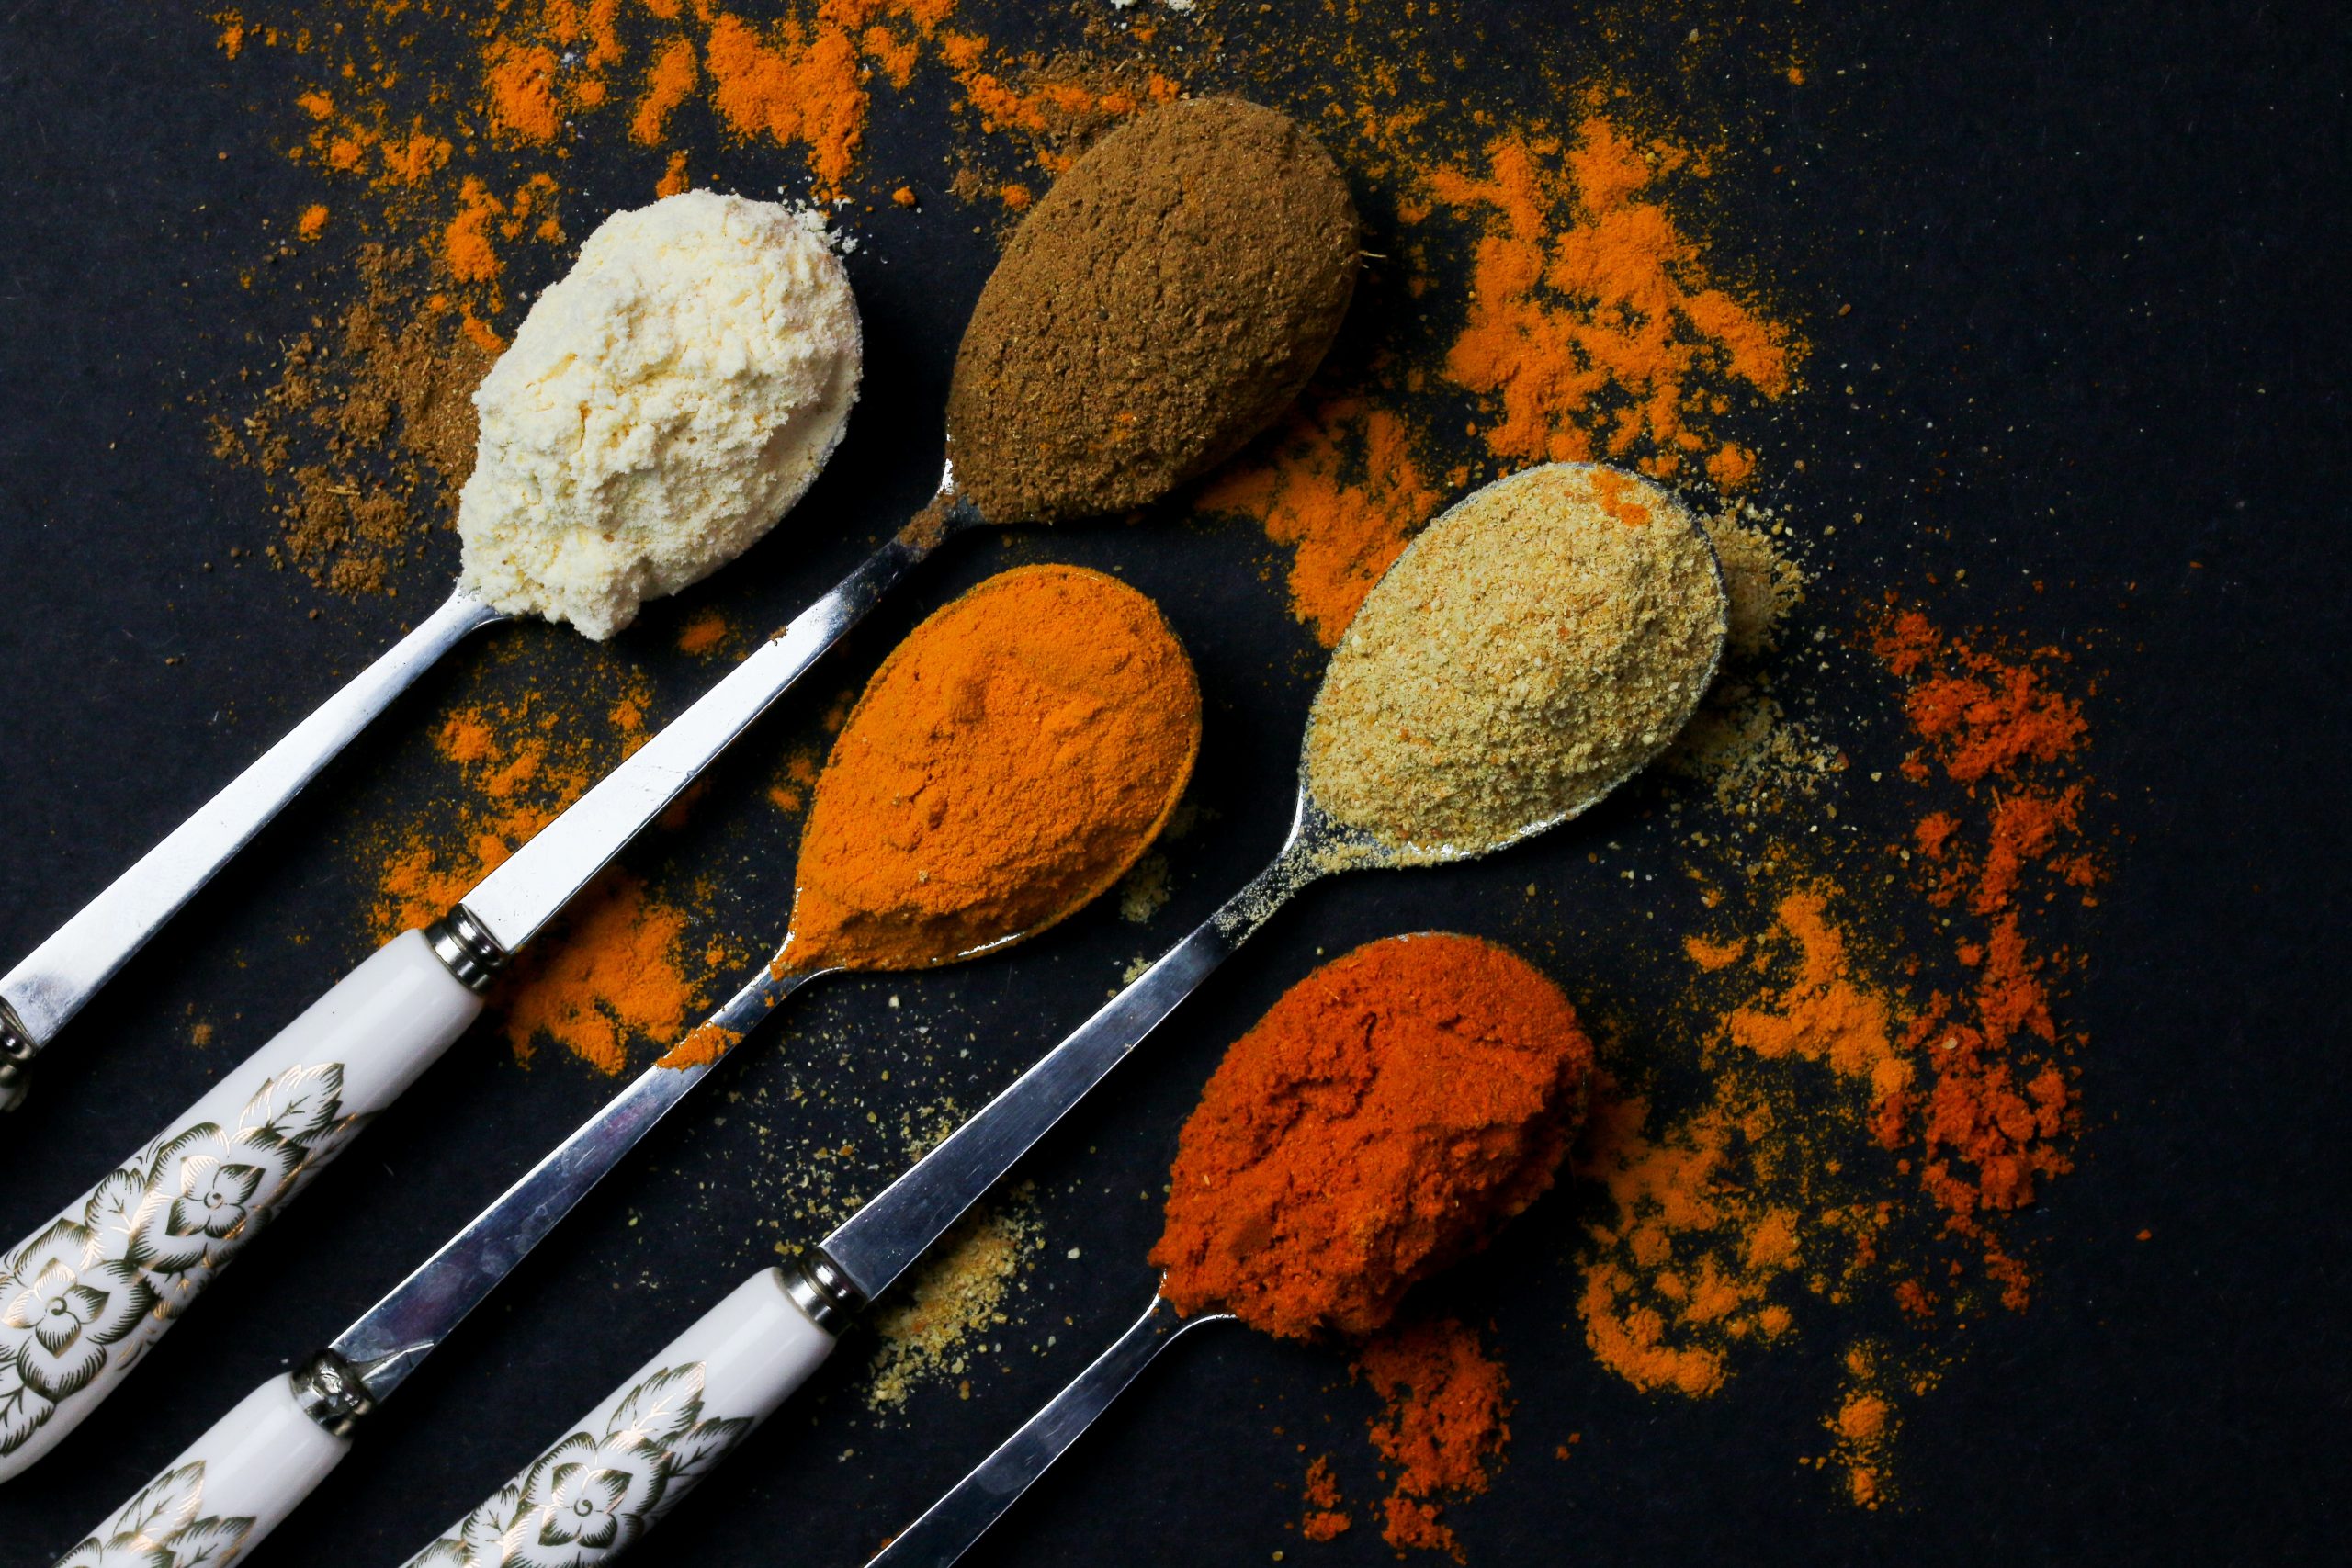 Spice mixes & spice blends<br />
